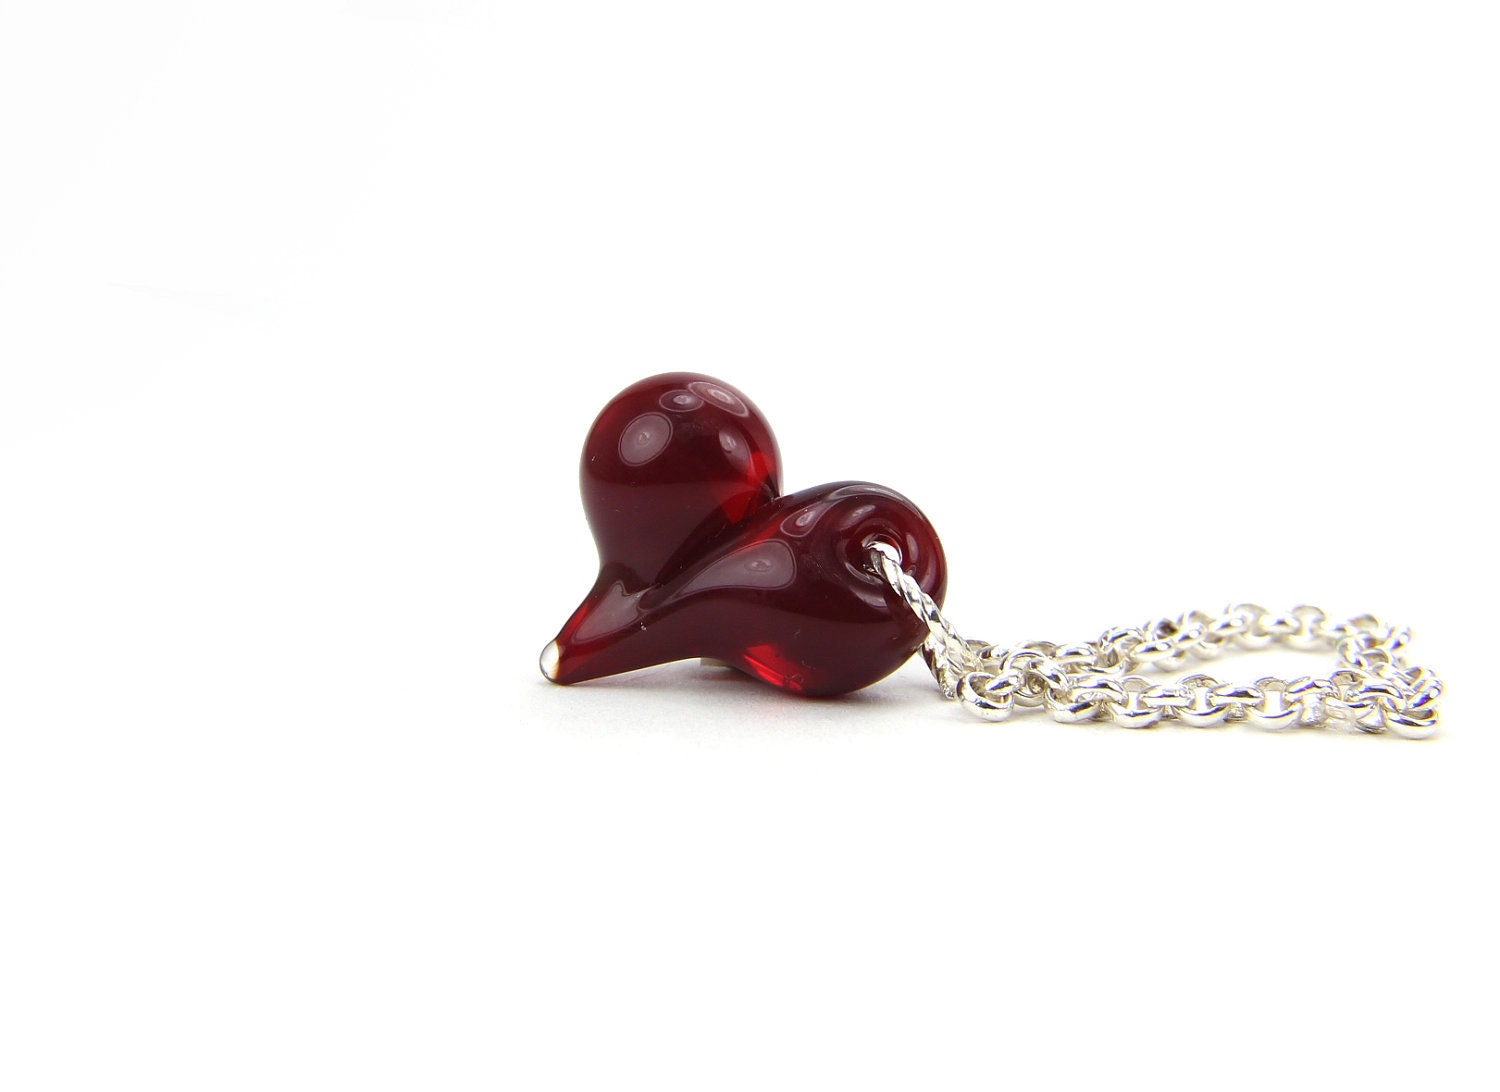 Romantic Red Heart Necklace Valentines Day Gift Under 25 - Thebracelettree